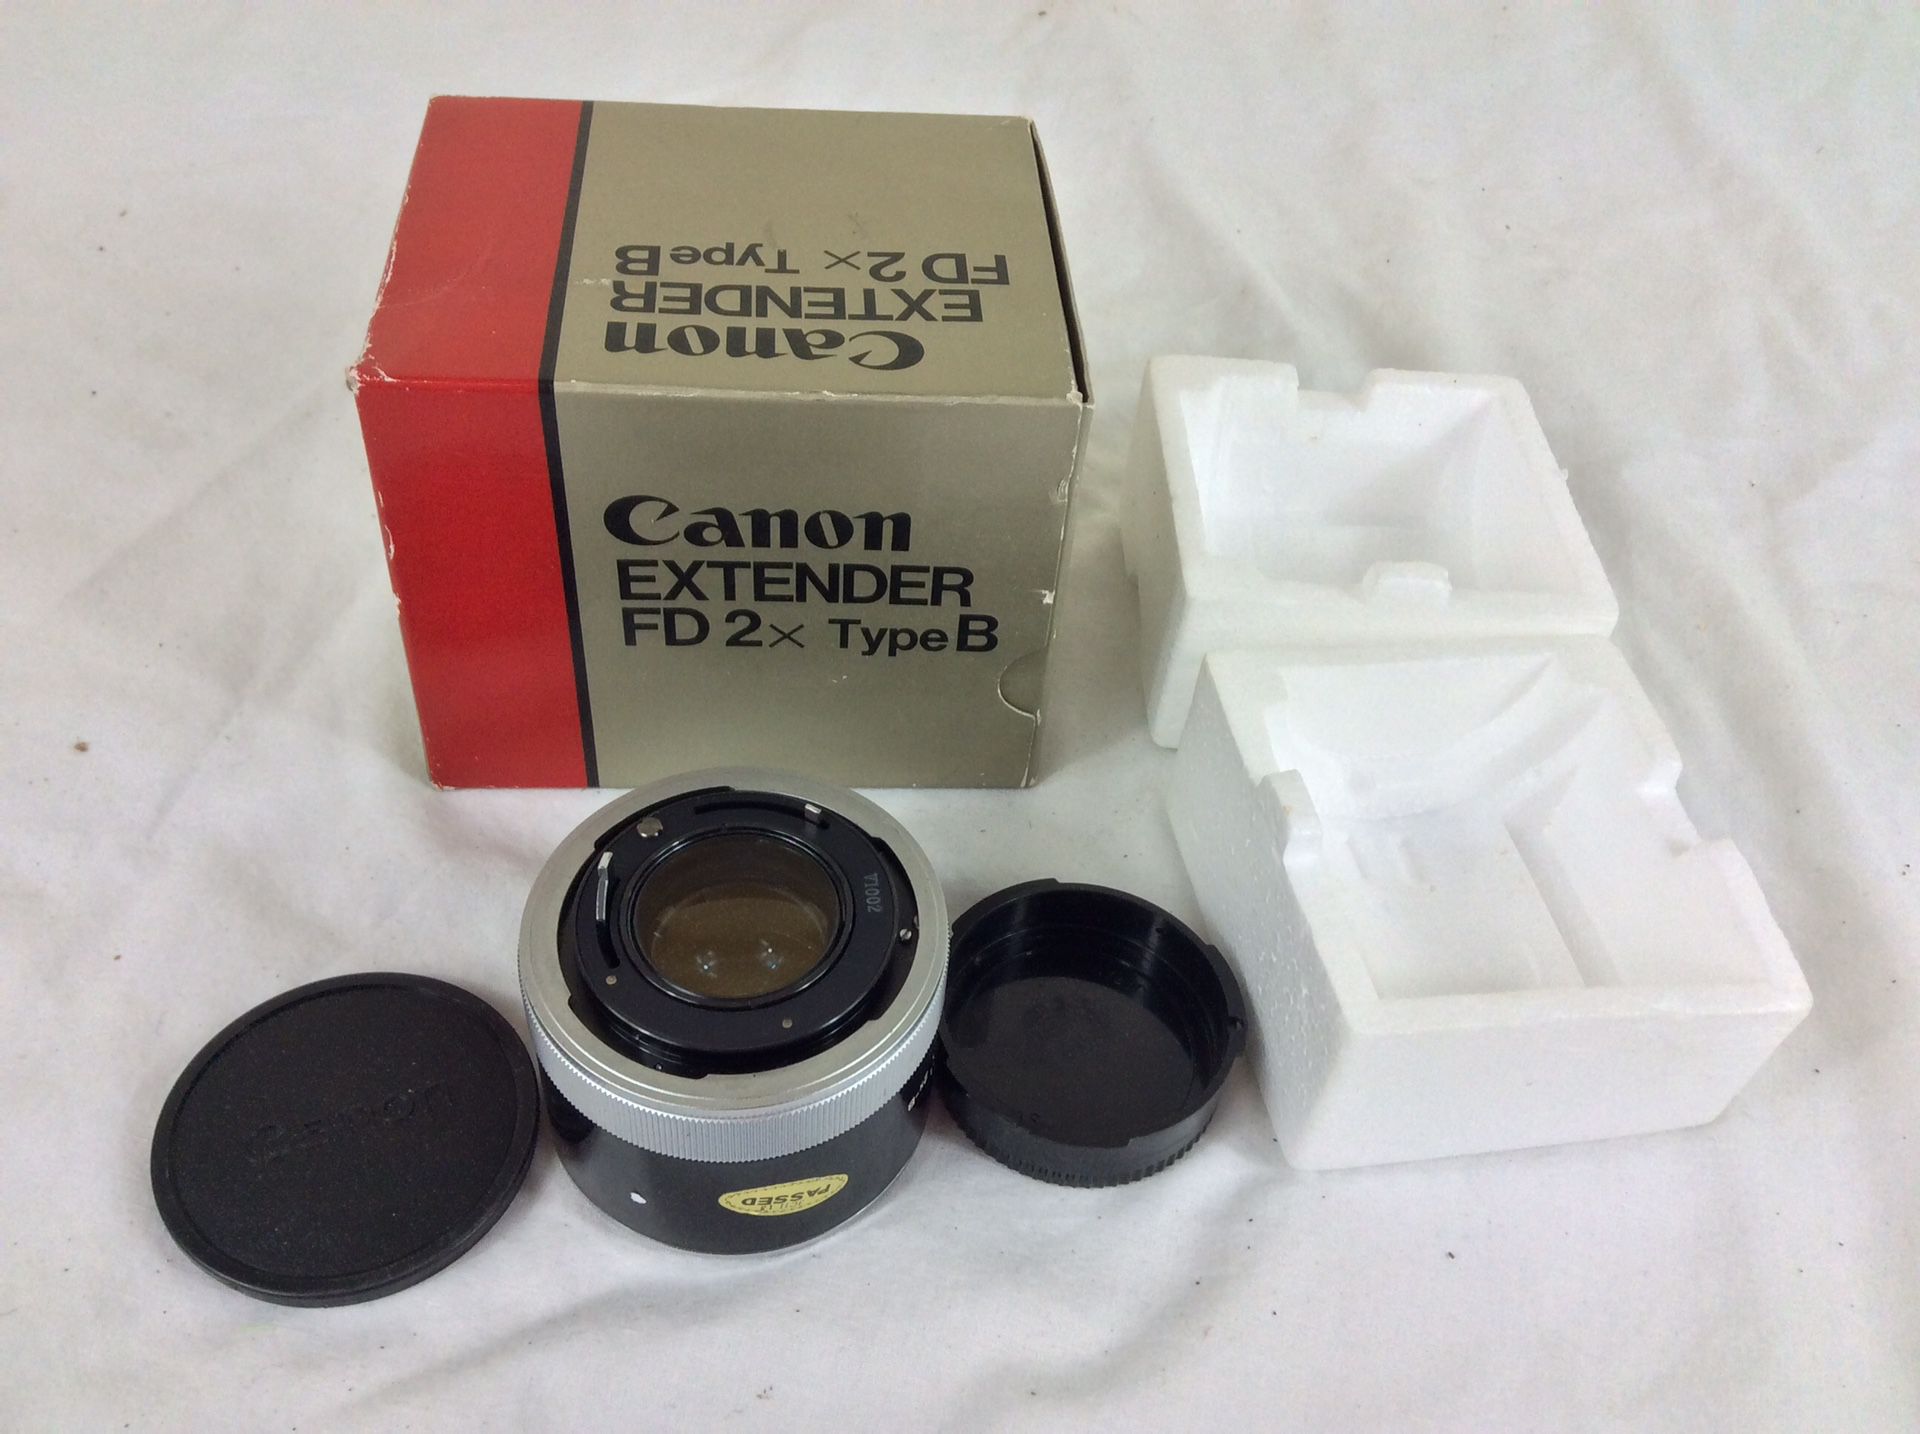 Canon FD 2X, Type B Extender With Box